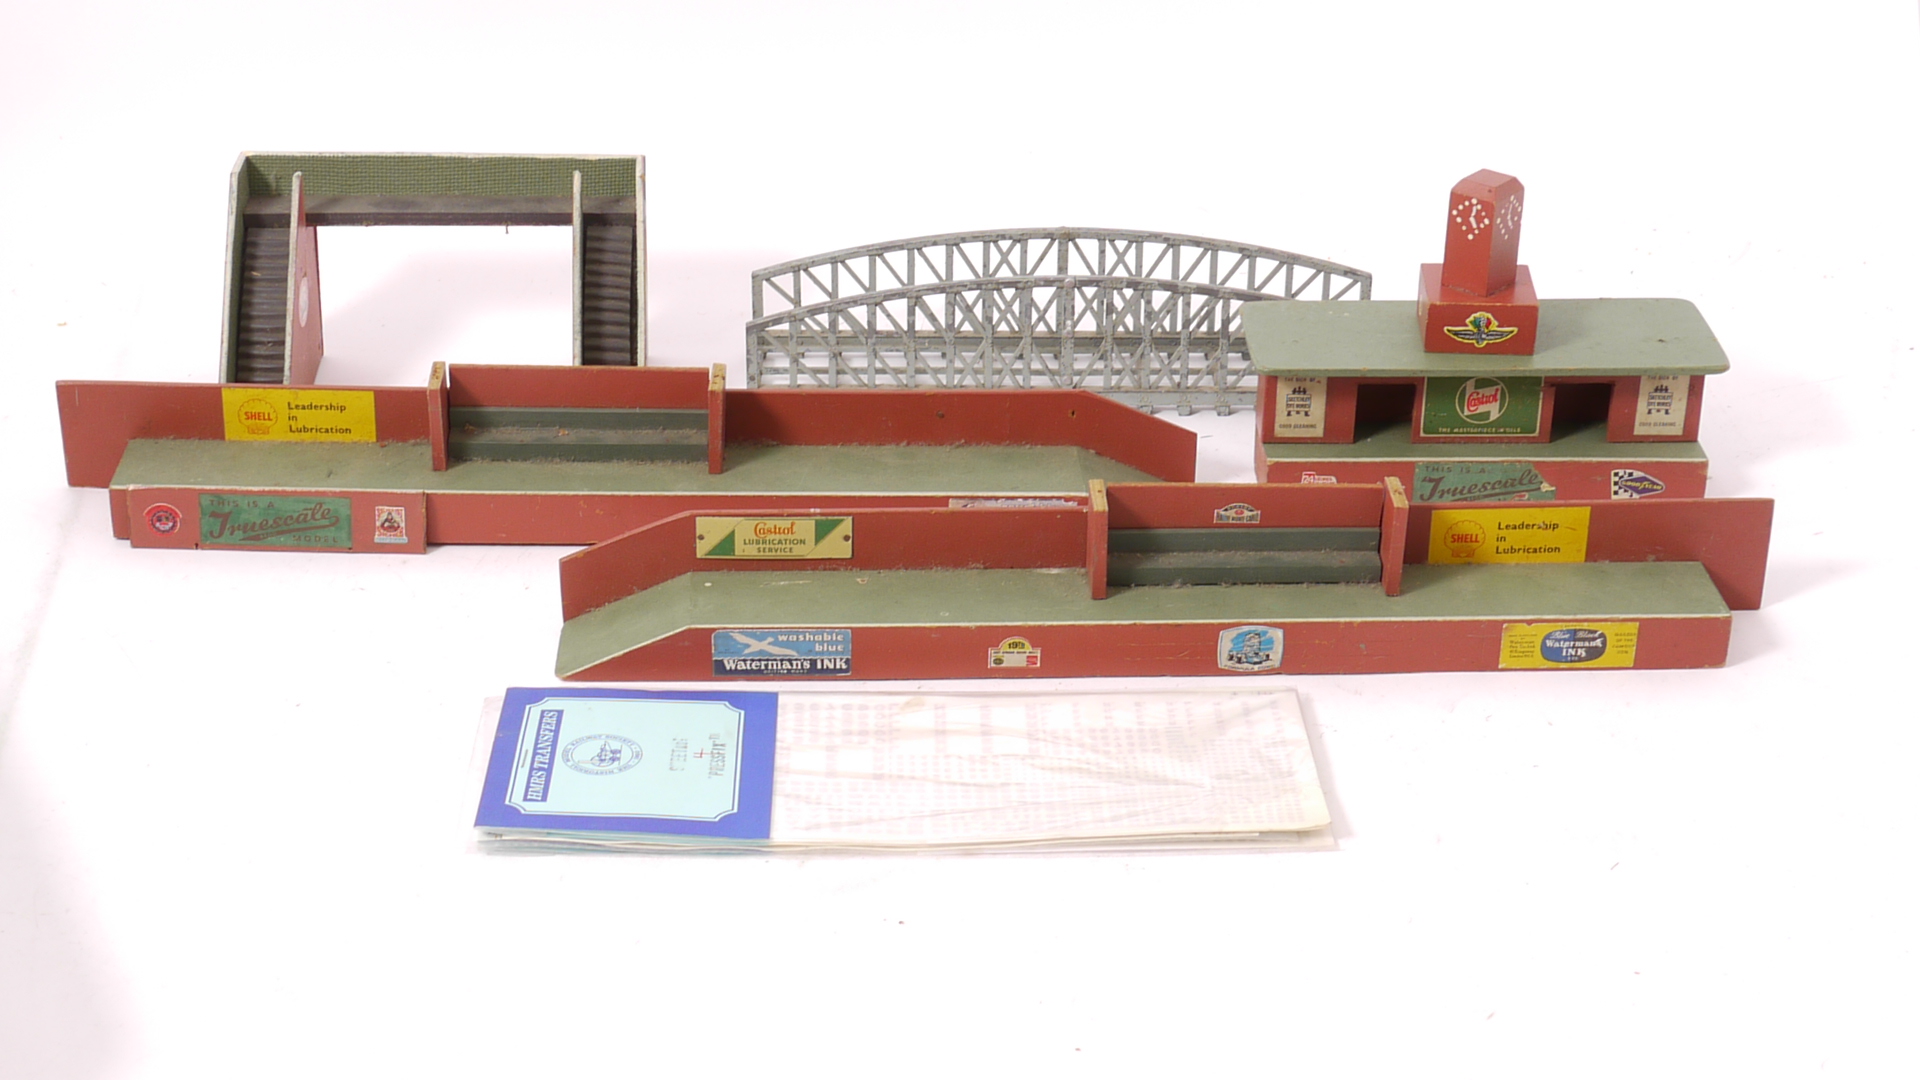 Truescale and Master Models OO Gauge Railway Accessories, including a Truescale 4-part station (